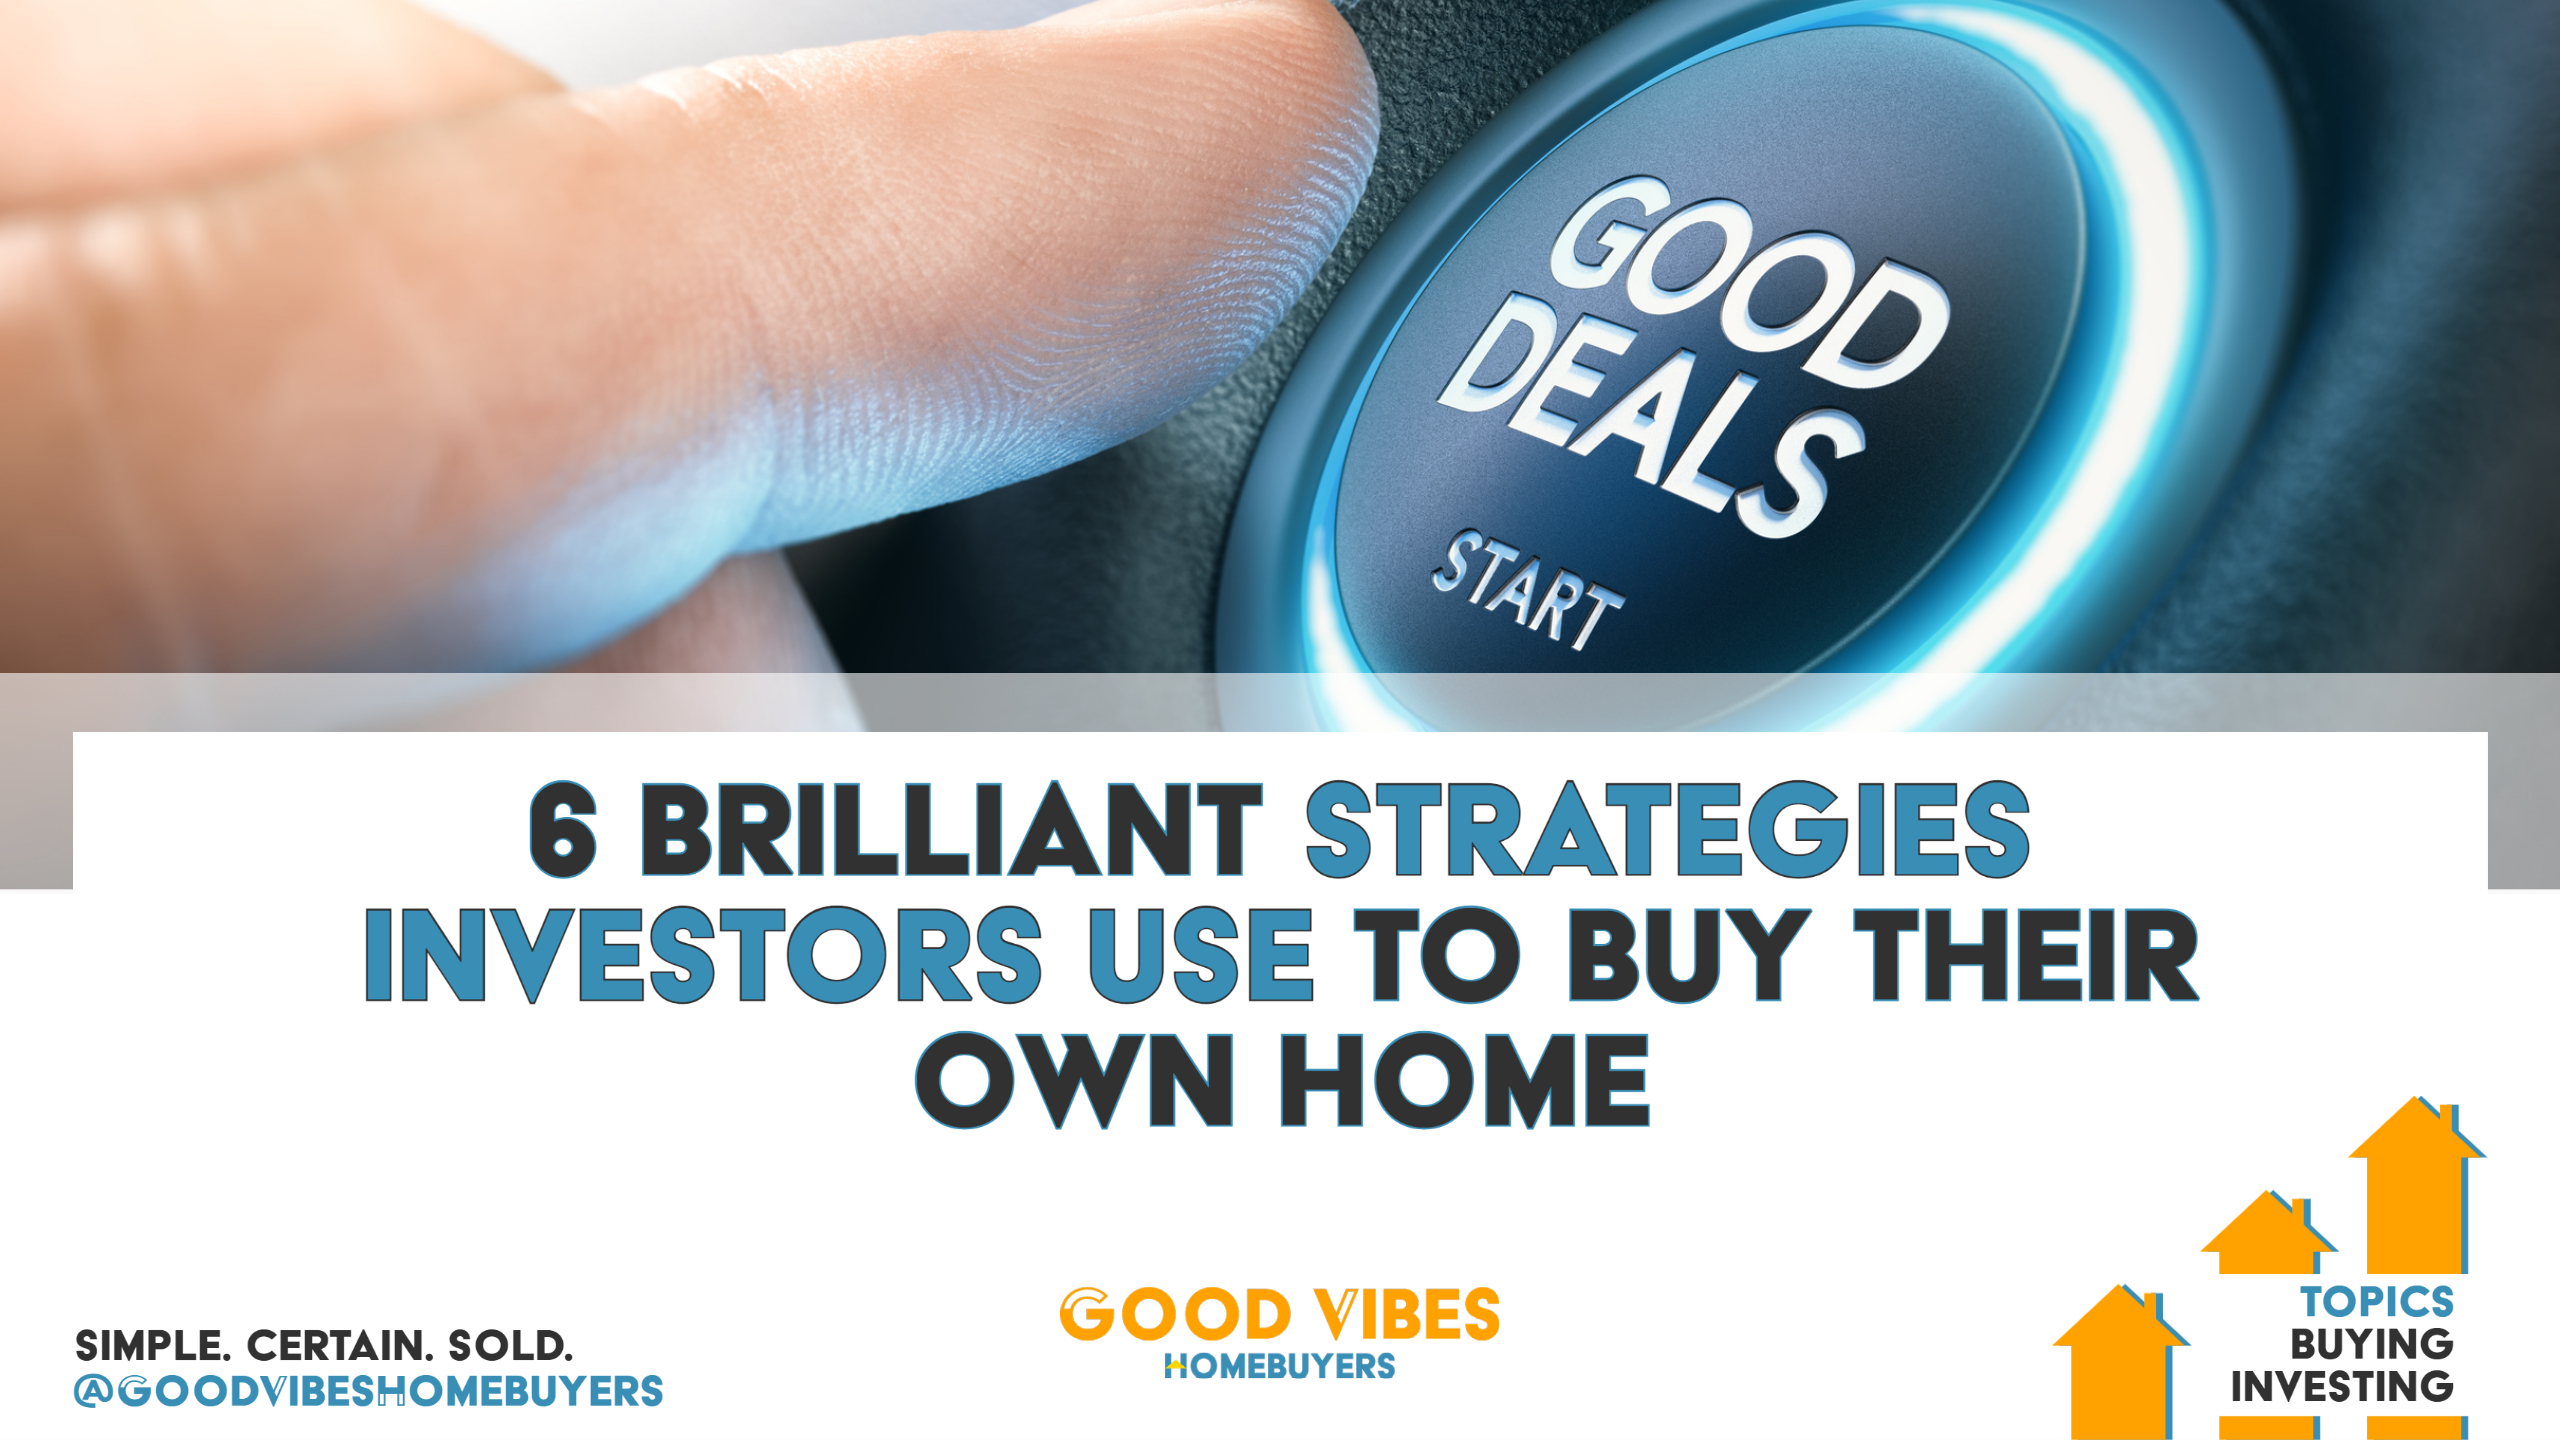 6 Brilliant Strategies Investors Use to Buy Their Own Home